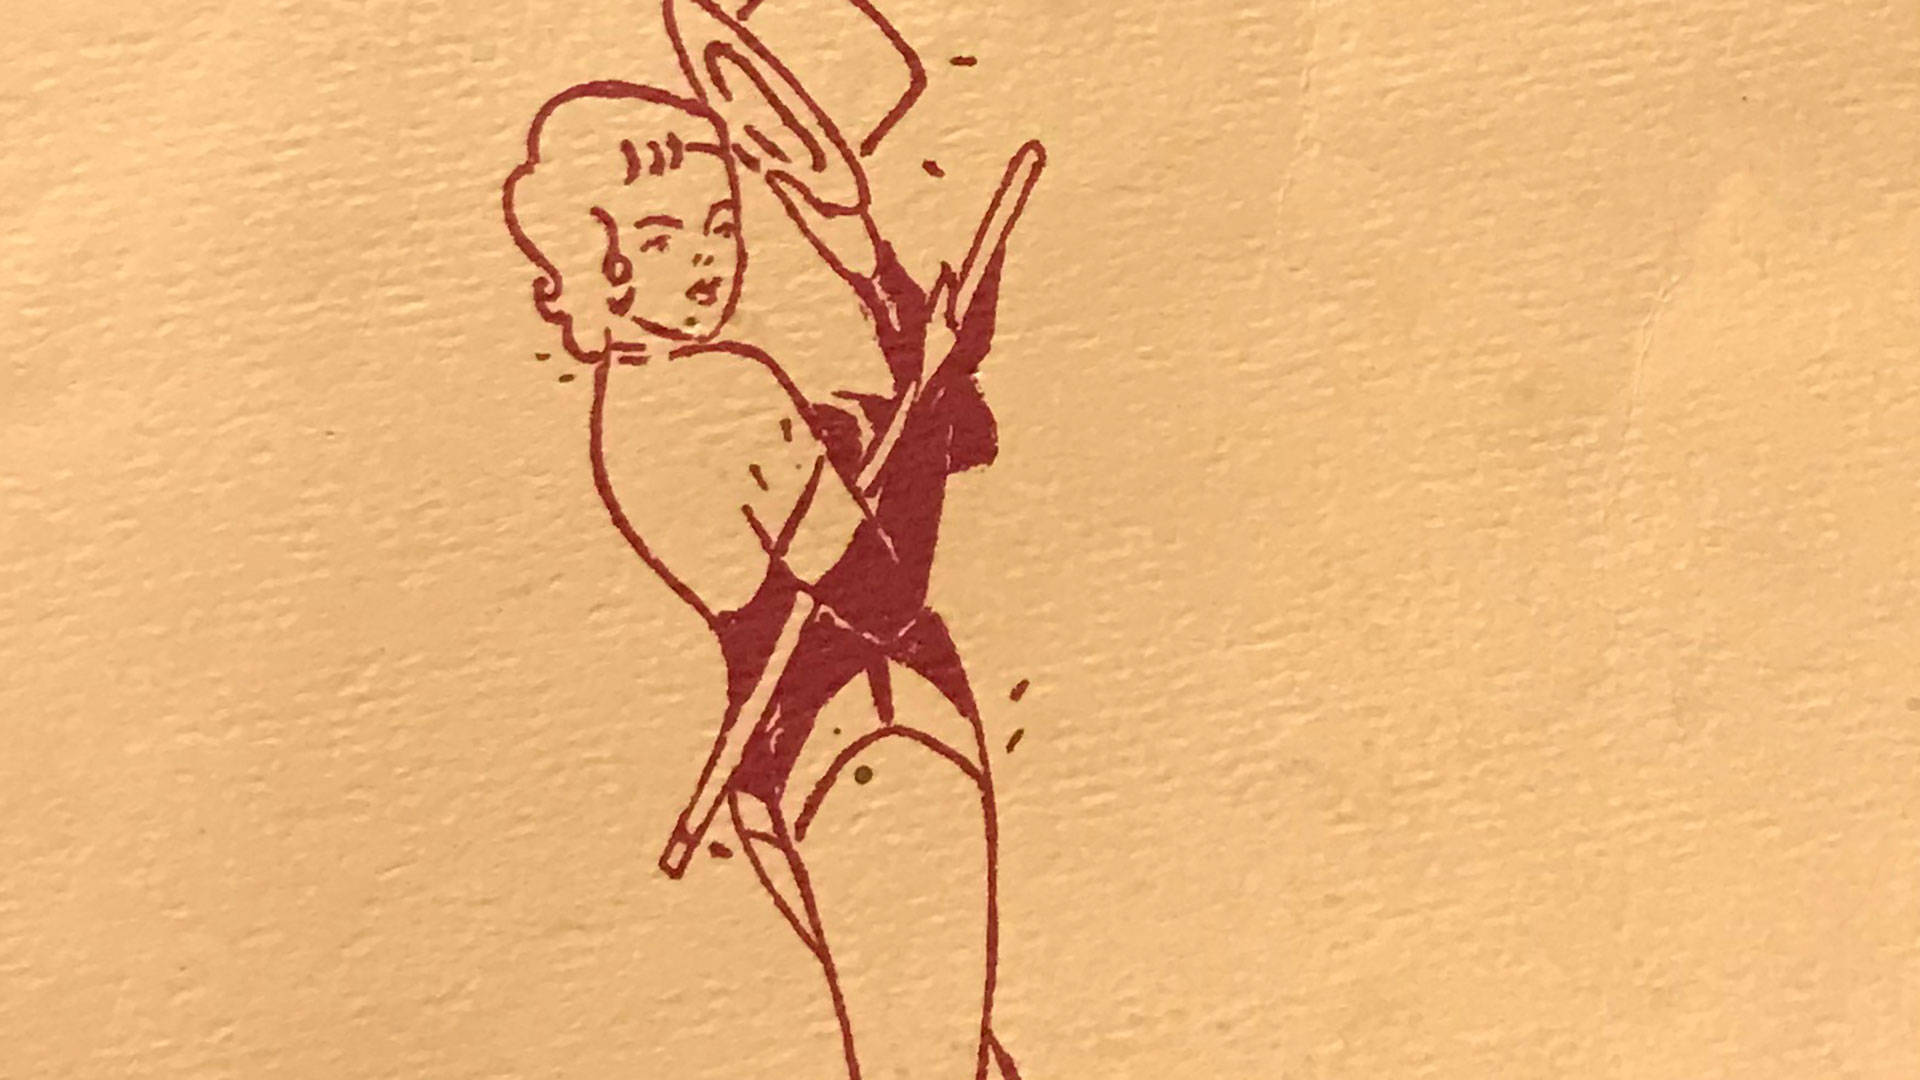 Detail from one of Rita Cecaci's Raiderettes programs from 1962. Pendarvis Harshaw